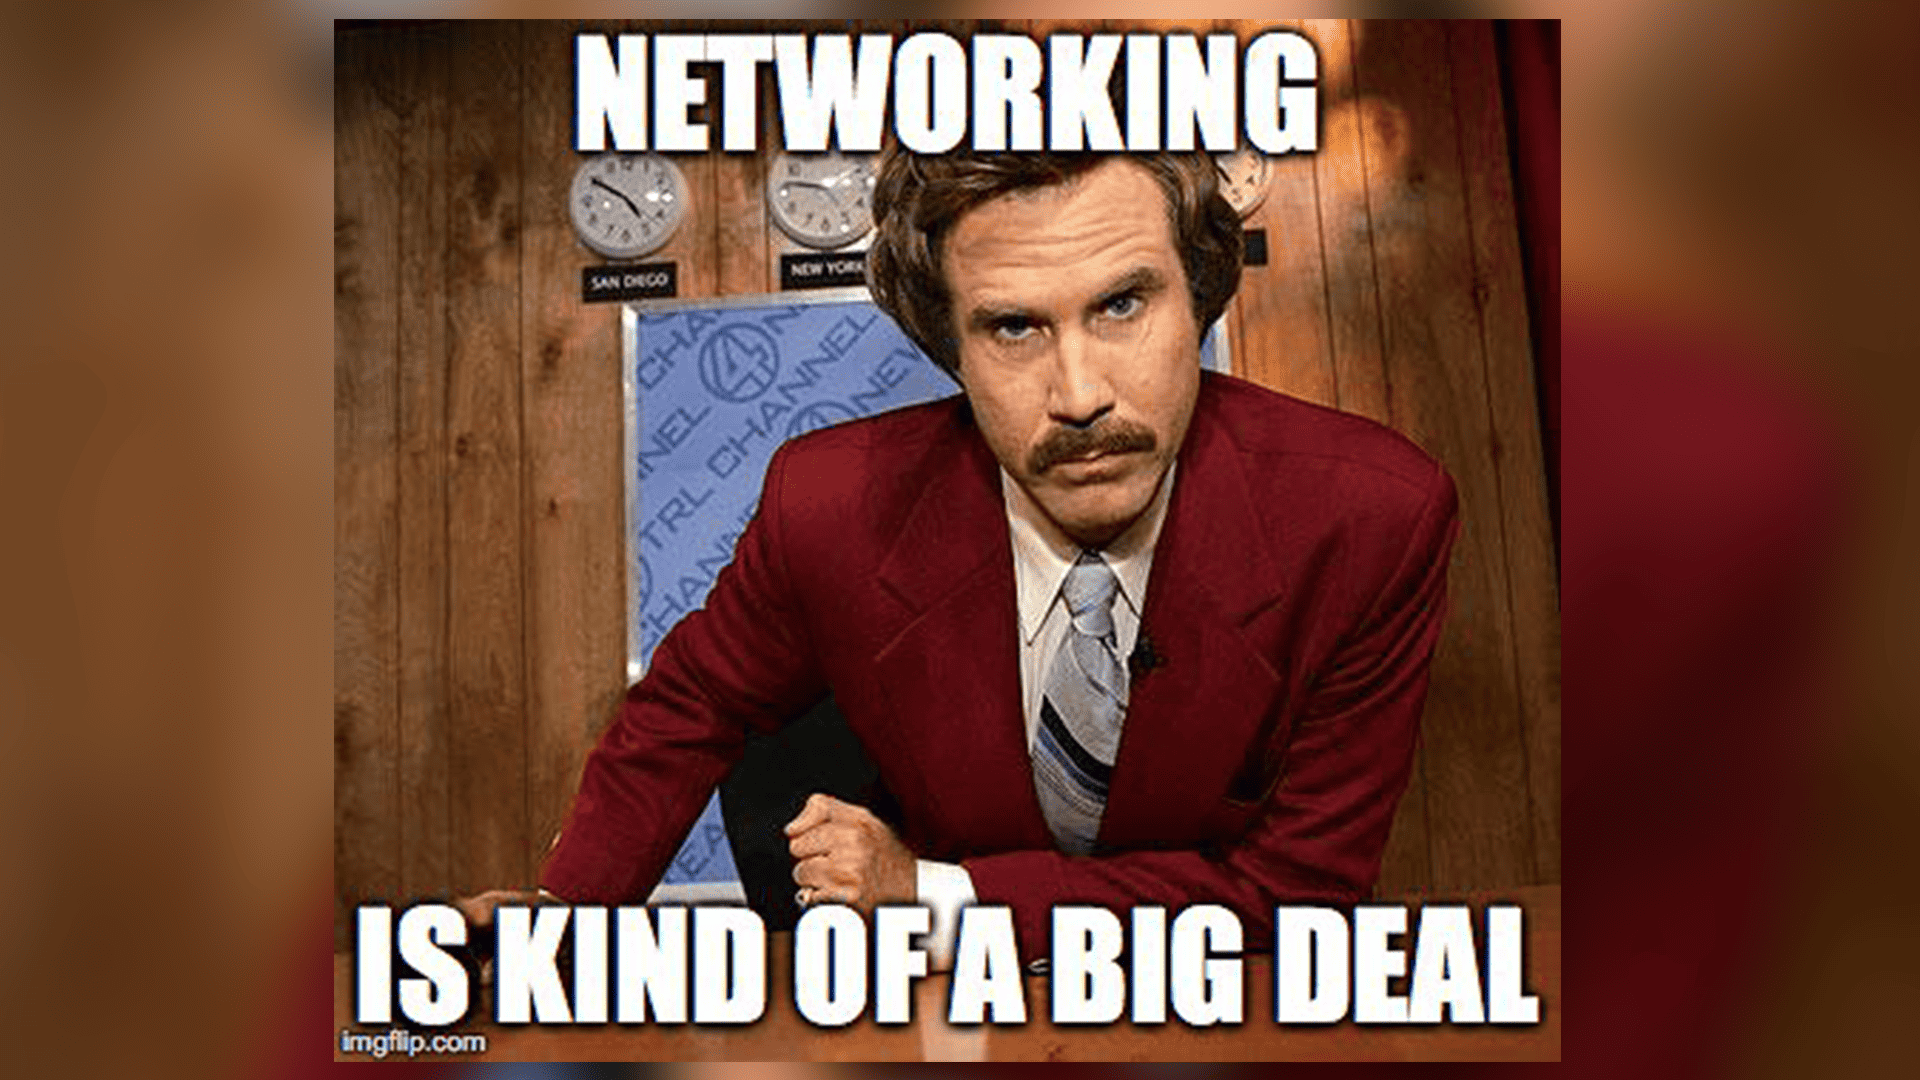 Will Ferrell in a red suit meme, networking, big deal, connections